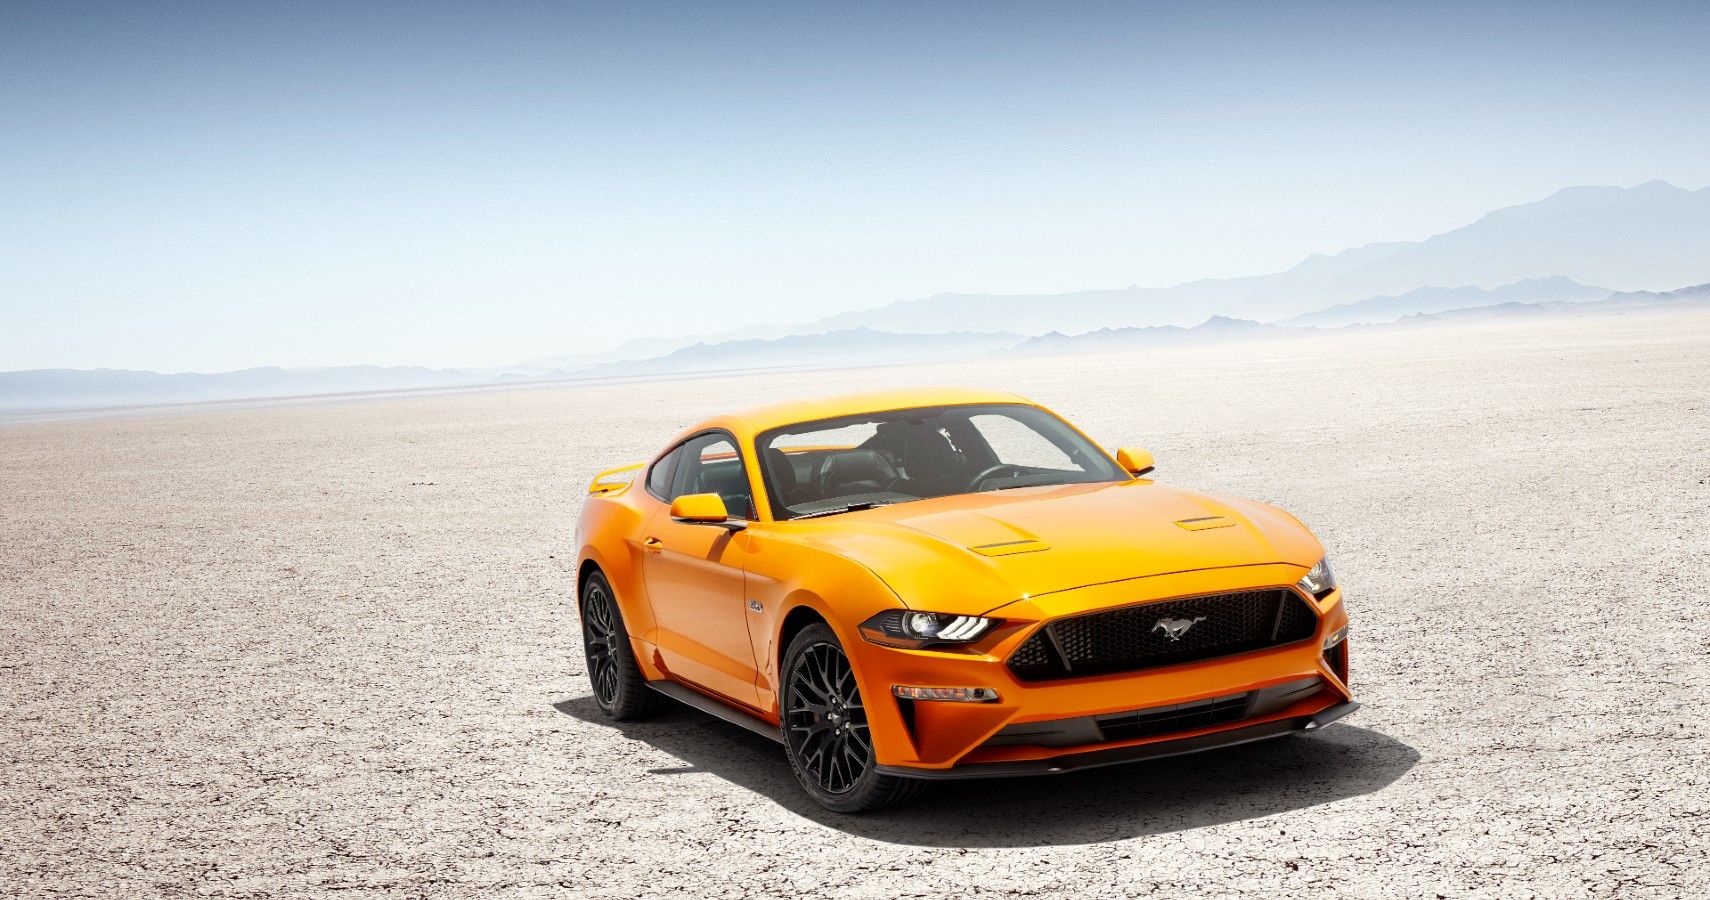 2018 Ford Mustang GT Feature Image